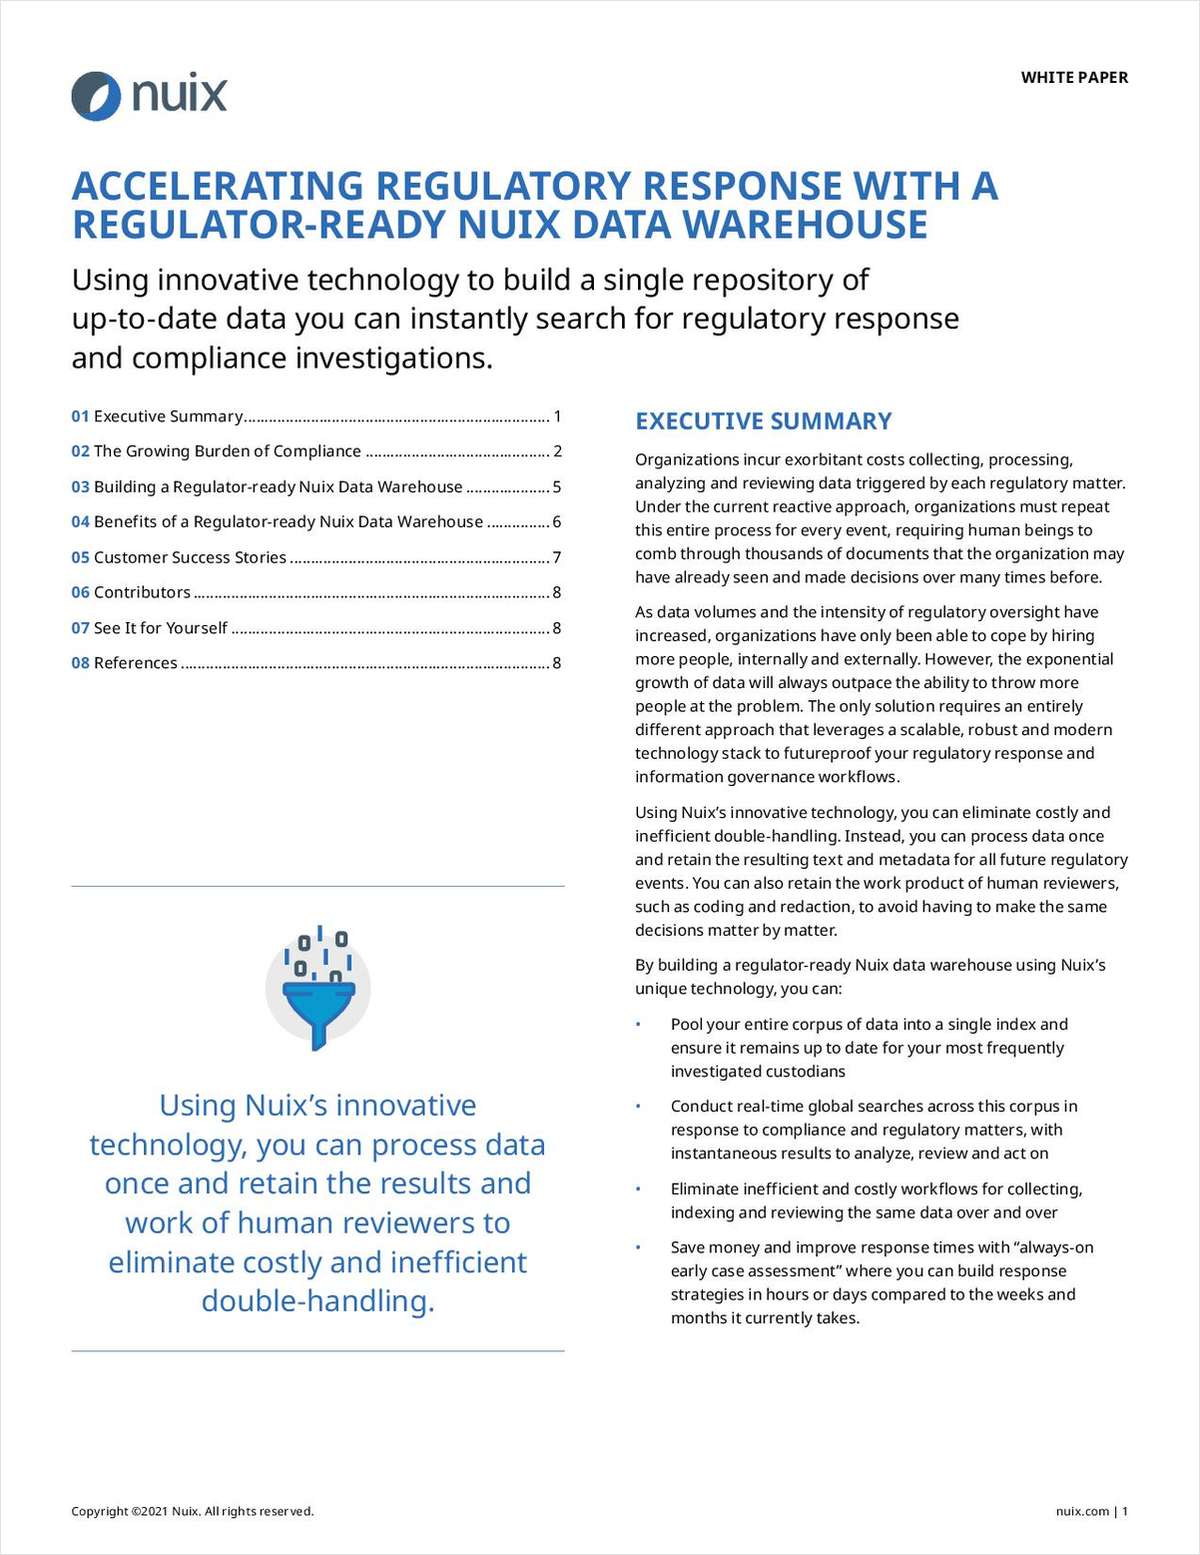 Download this white paper and learn how to use innovative technology to build a single repository of up-to-date data to instantly search for regulatory response and compliance investigations.